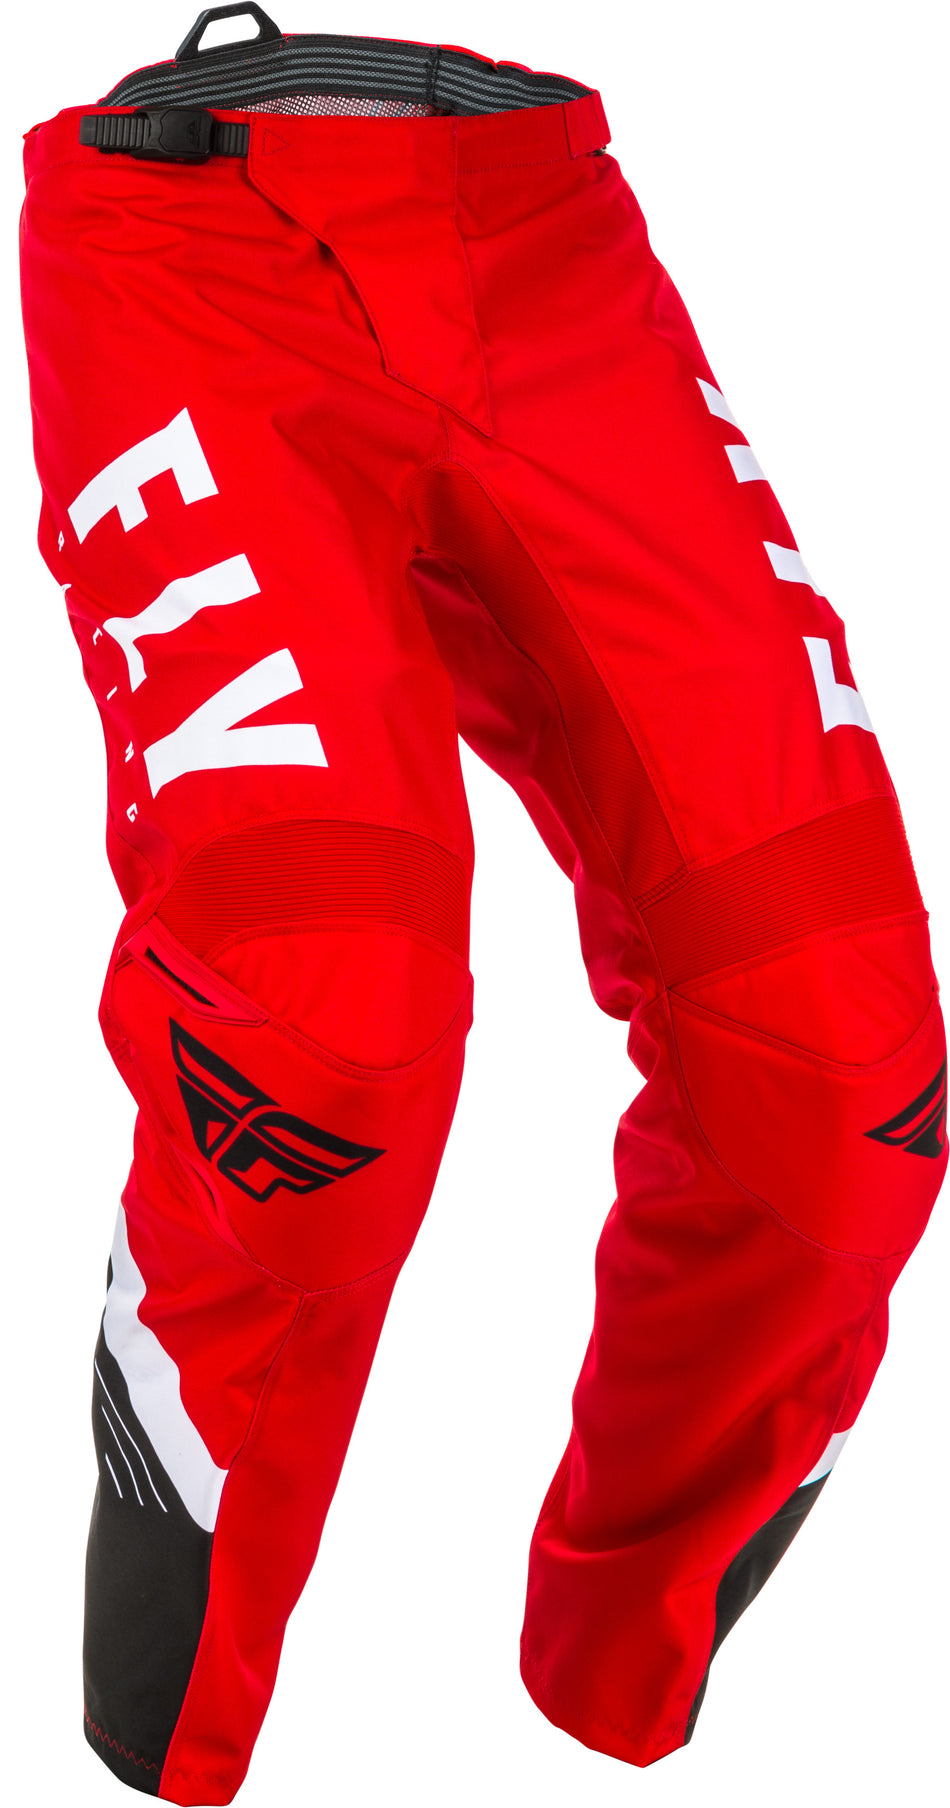 FLY RACING F-16 Pants Red/Black/White Sz 36 373-93336